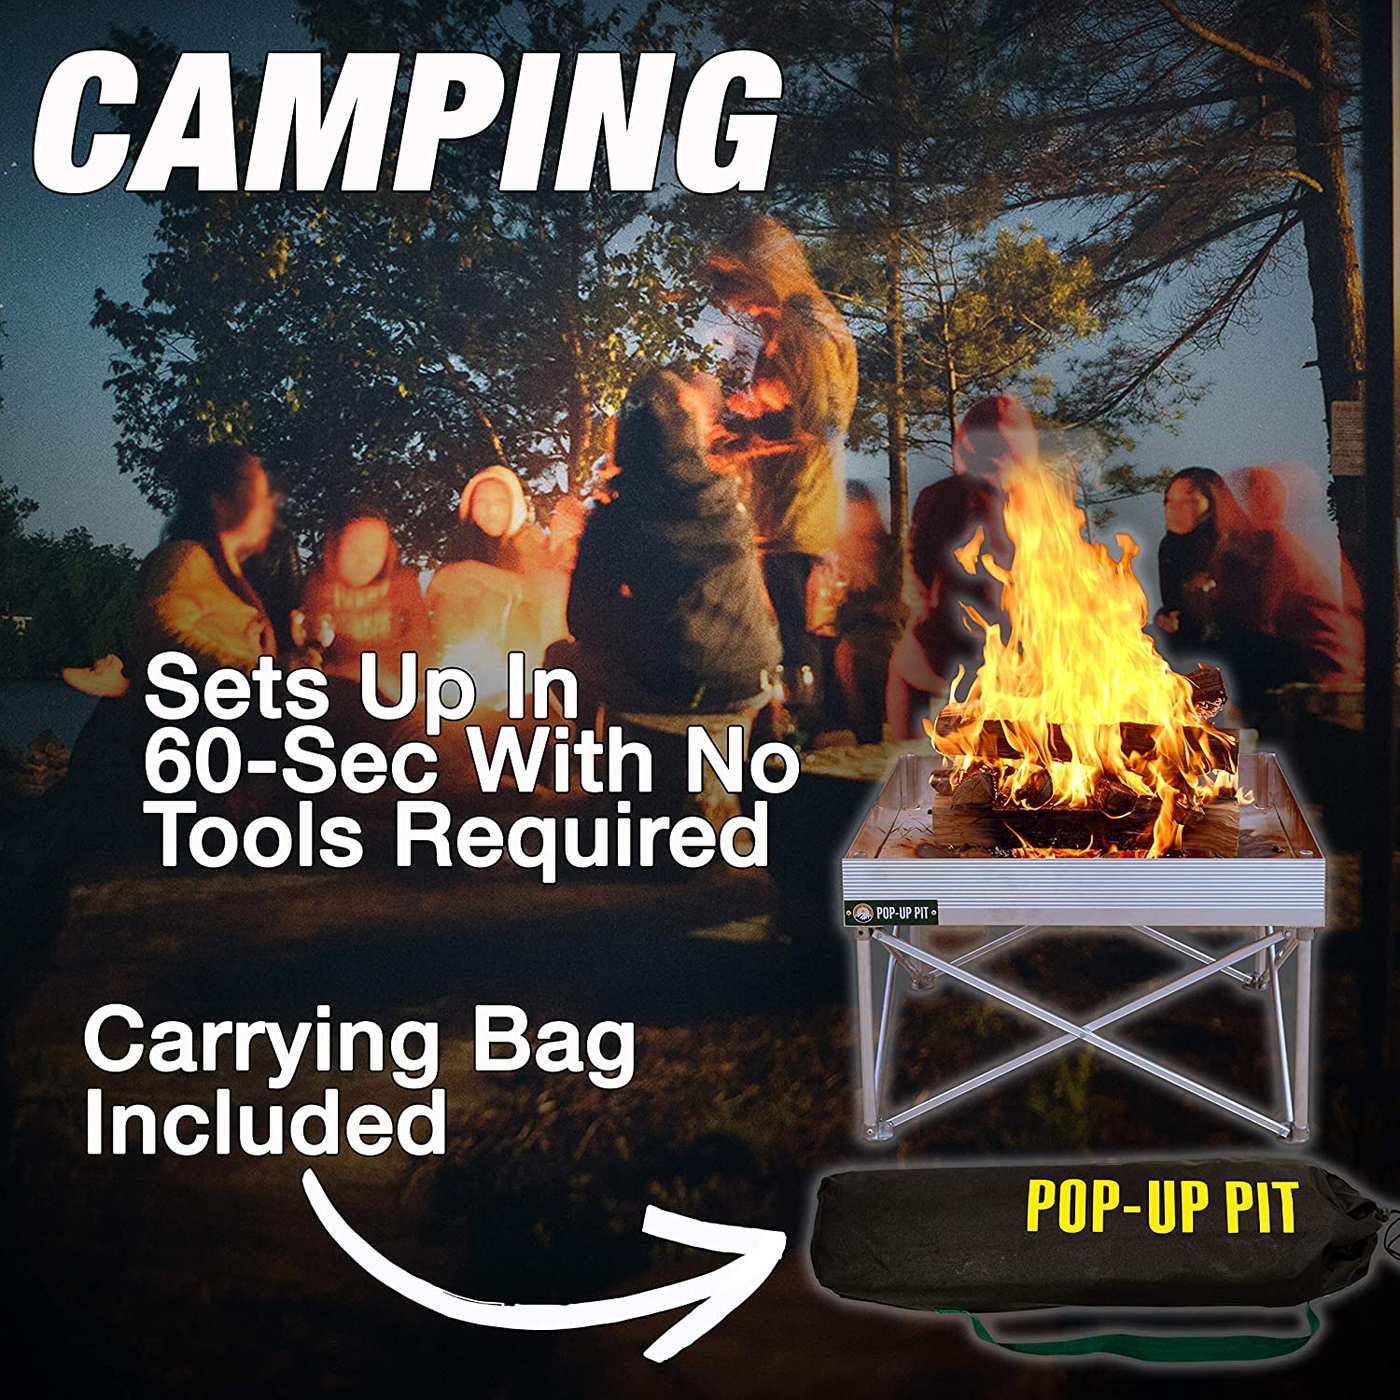 Pop-Up Fire Pit | Portable and Lightweight | Fullsize 24 Inch | Weighs 7 lbs. | Never Rust Fire Pit | Heat Shield NOT Included